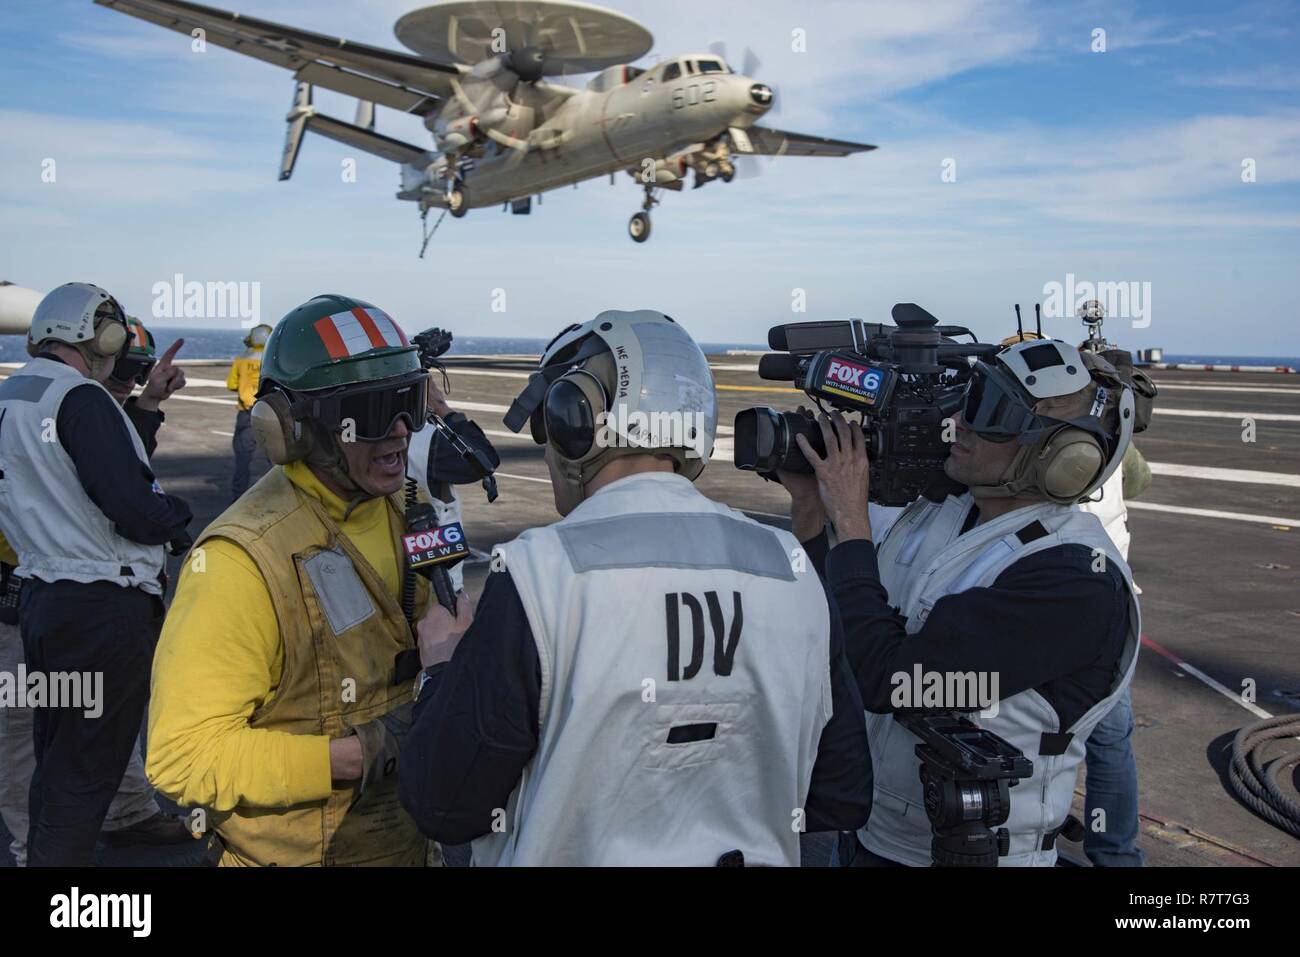 ATLANTIC OCEAN (April 4, 2017) Lt. William Lee Tschumy, from Panama City, speaks with Milwaukee reporter Carl Deffenbaughon on the flight deck of the aircraft carrier USS Dwight D. Eisenhower (CVN 69). The ship and its carrier strike group are underway conducting a sustainment exercise in support of the Optimized Fleet Response Plan (OFRP). Stock Photo